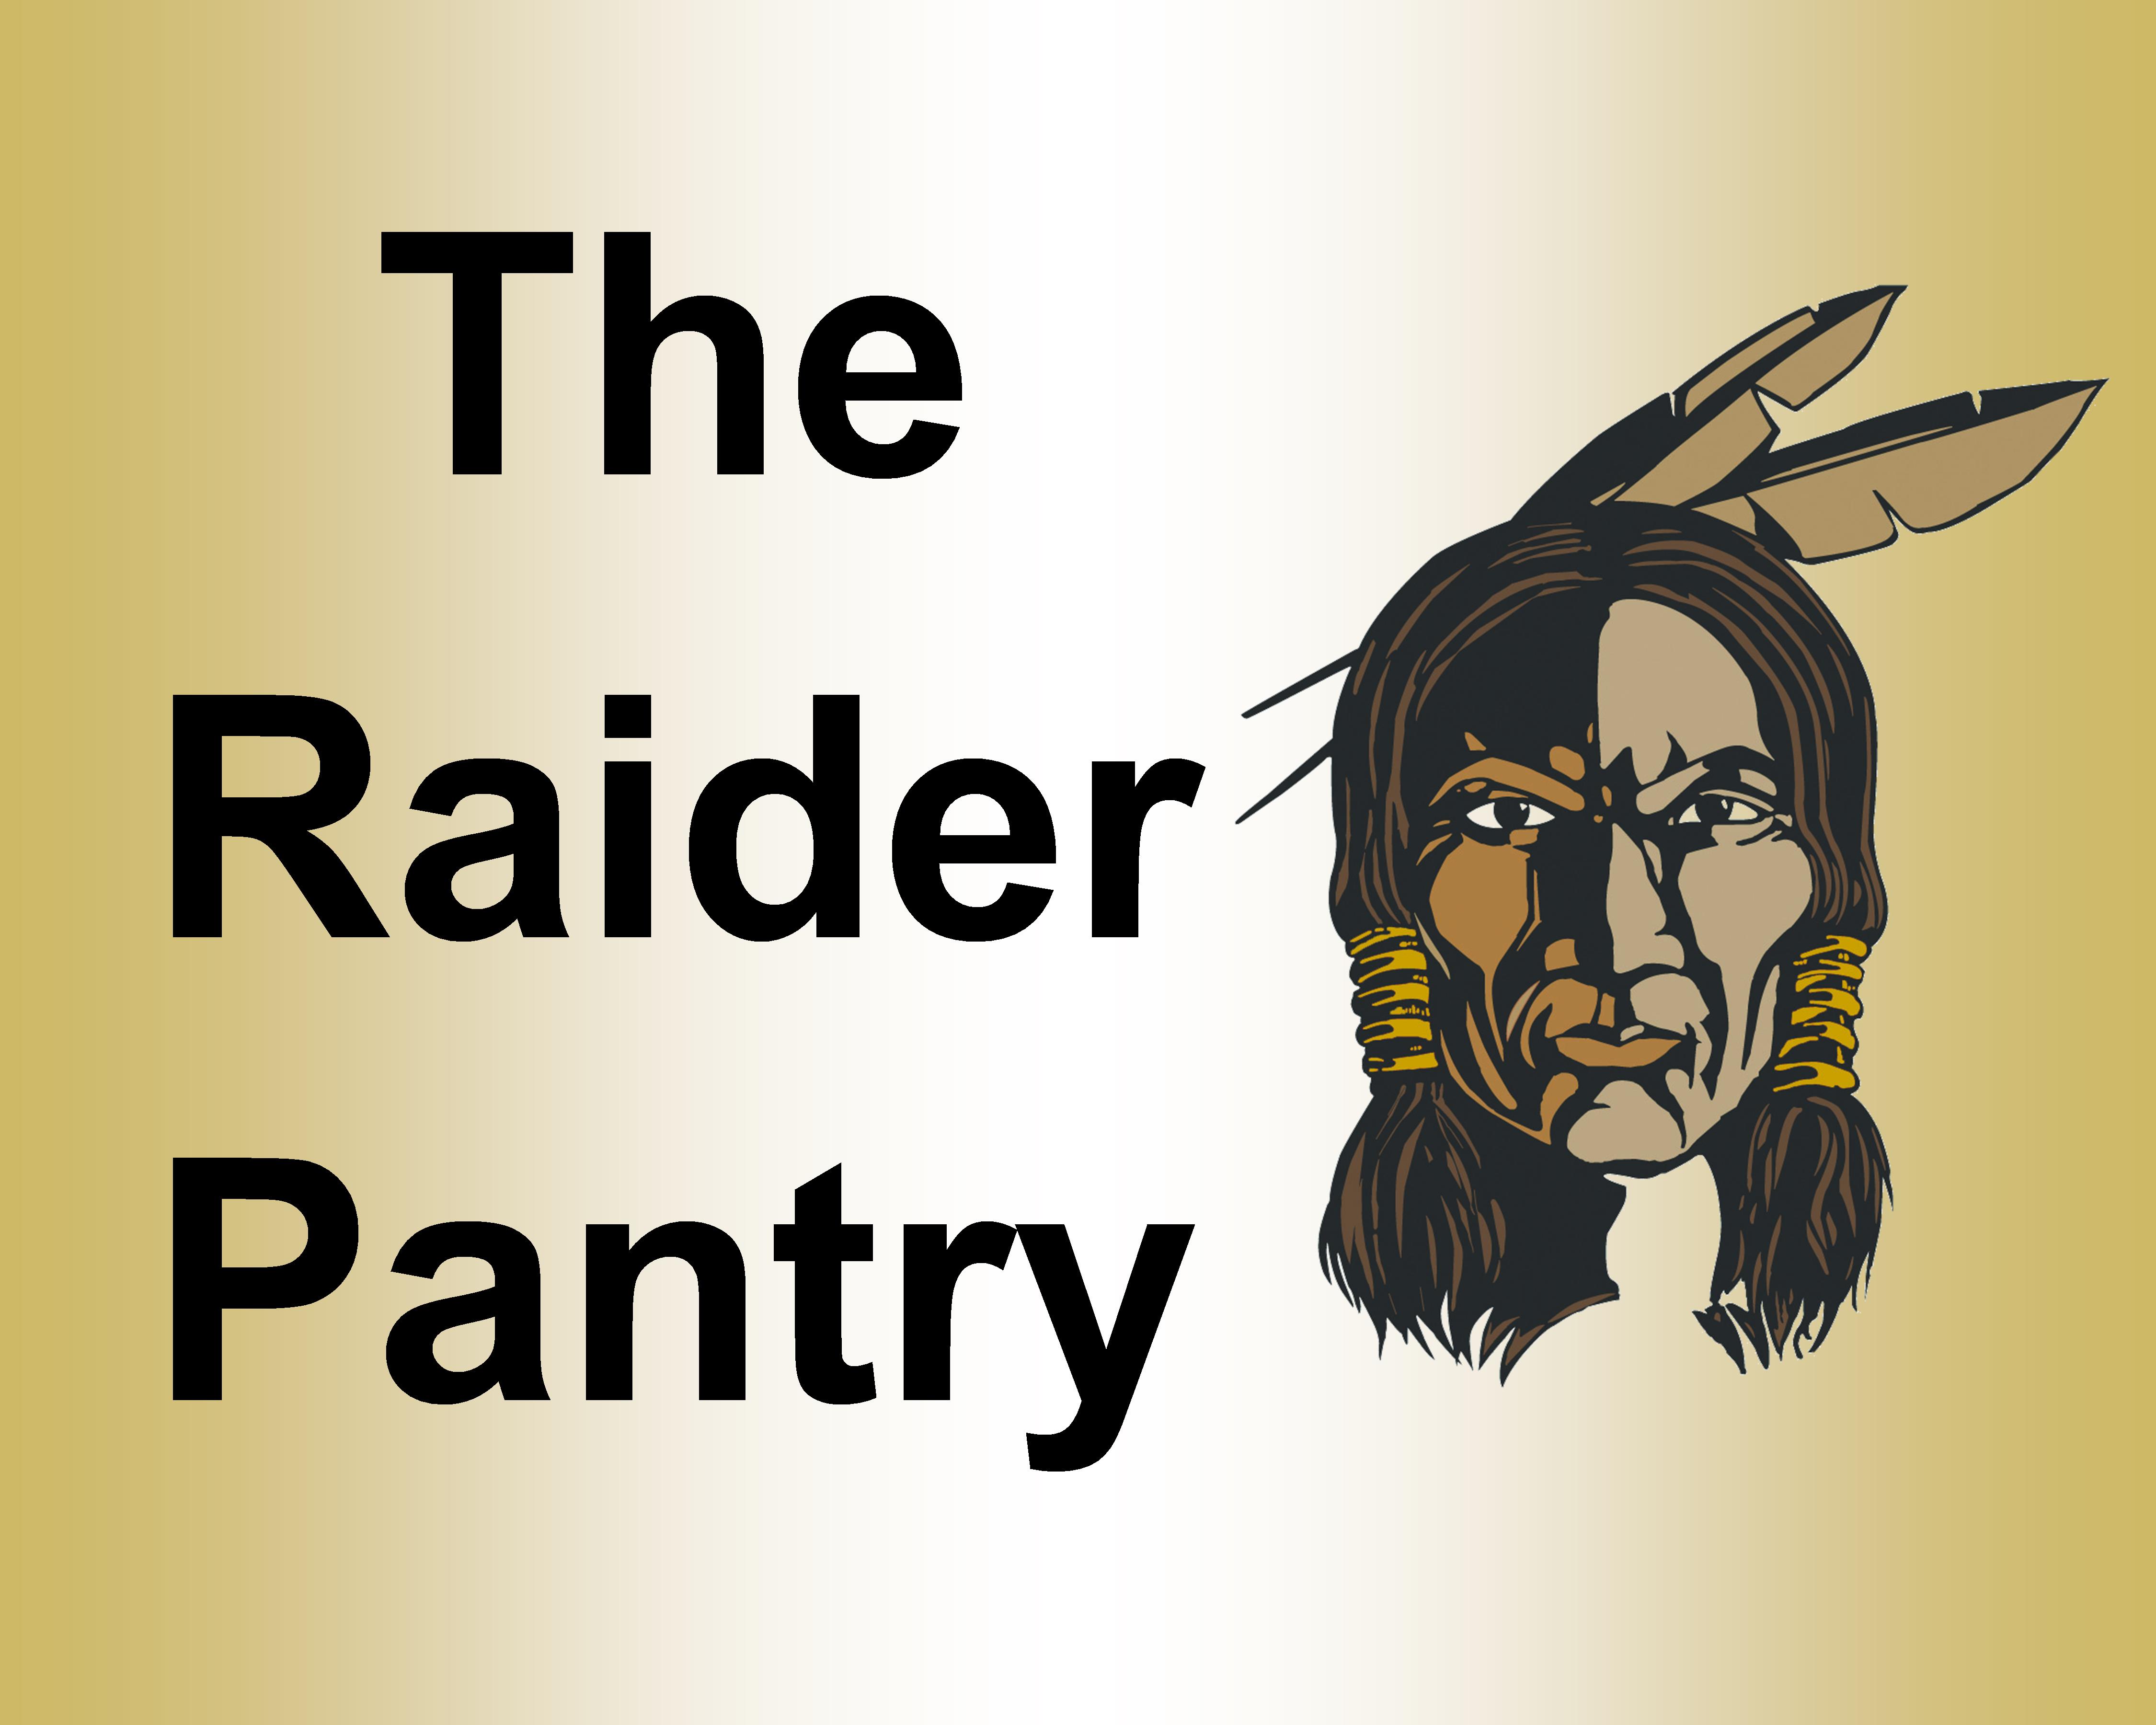 The Raider Pantry is Up and Running